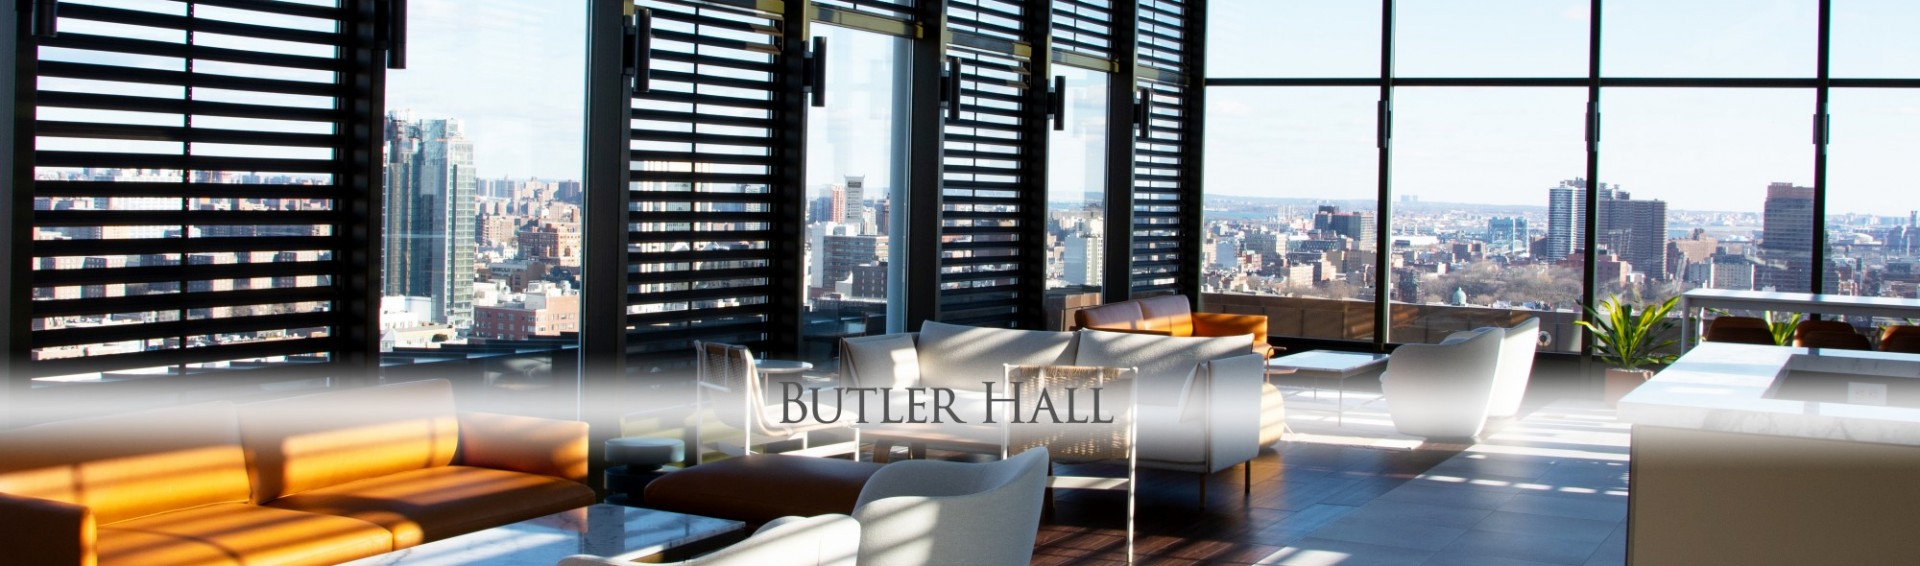 Butler Atrium, located on the top floor of Butler Hall